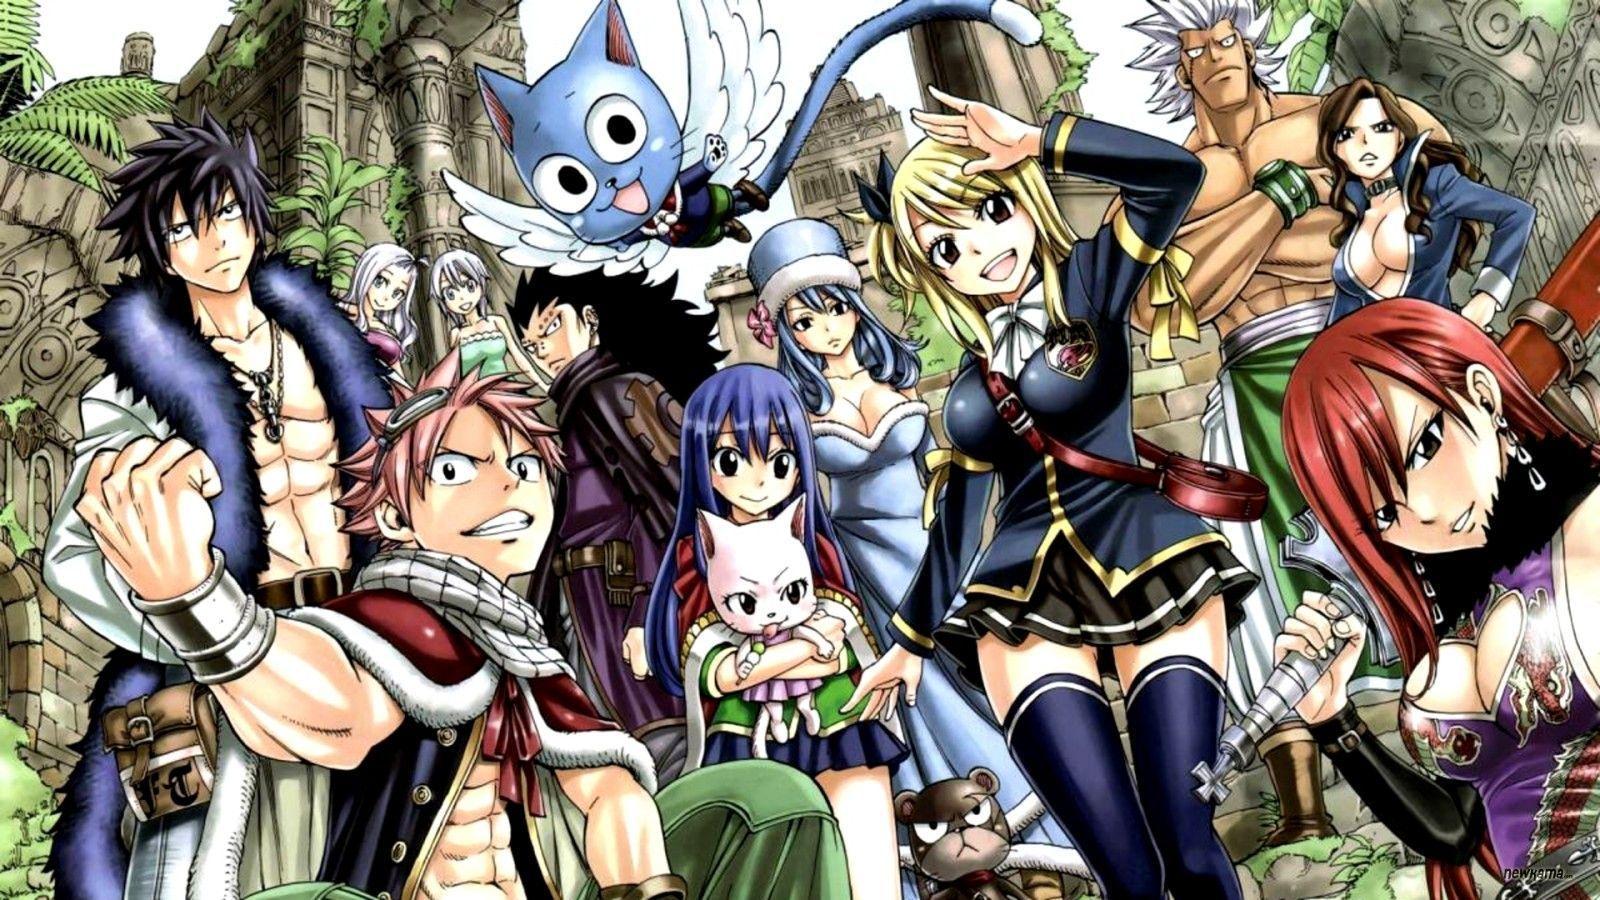 High Definition Collection: Fairy Tail Wallpaper, 38 Full HD Fairy